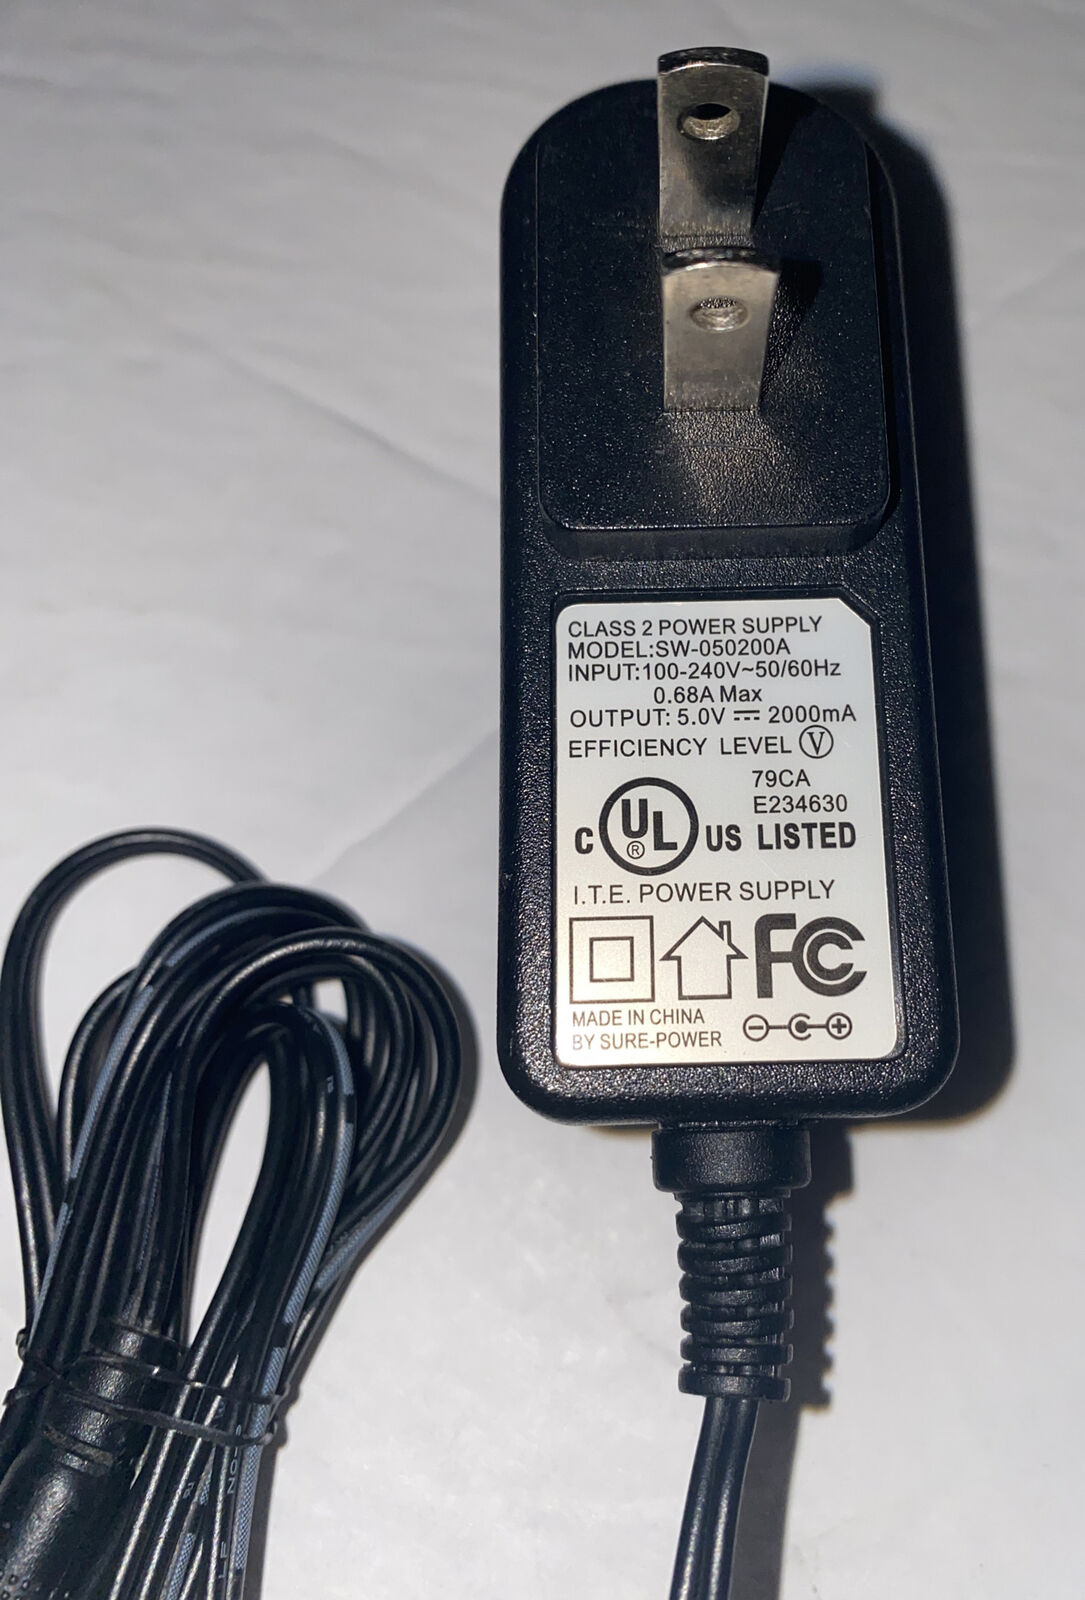 Nabi Class 2 Wall Charger AC Adapter Switching Power Supply SW-050200A 5V 2A 10W Brand: Class 2 power supply I.T.E T - Click Image to Close